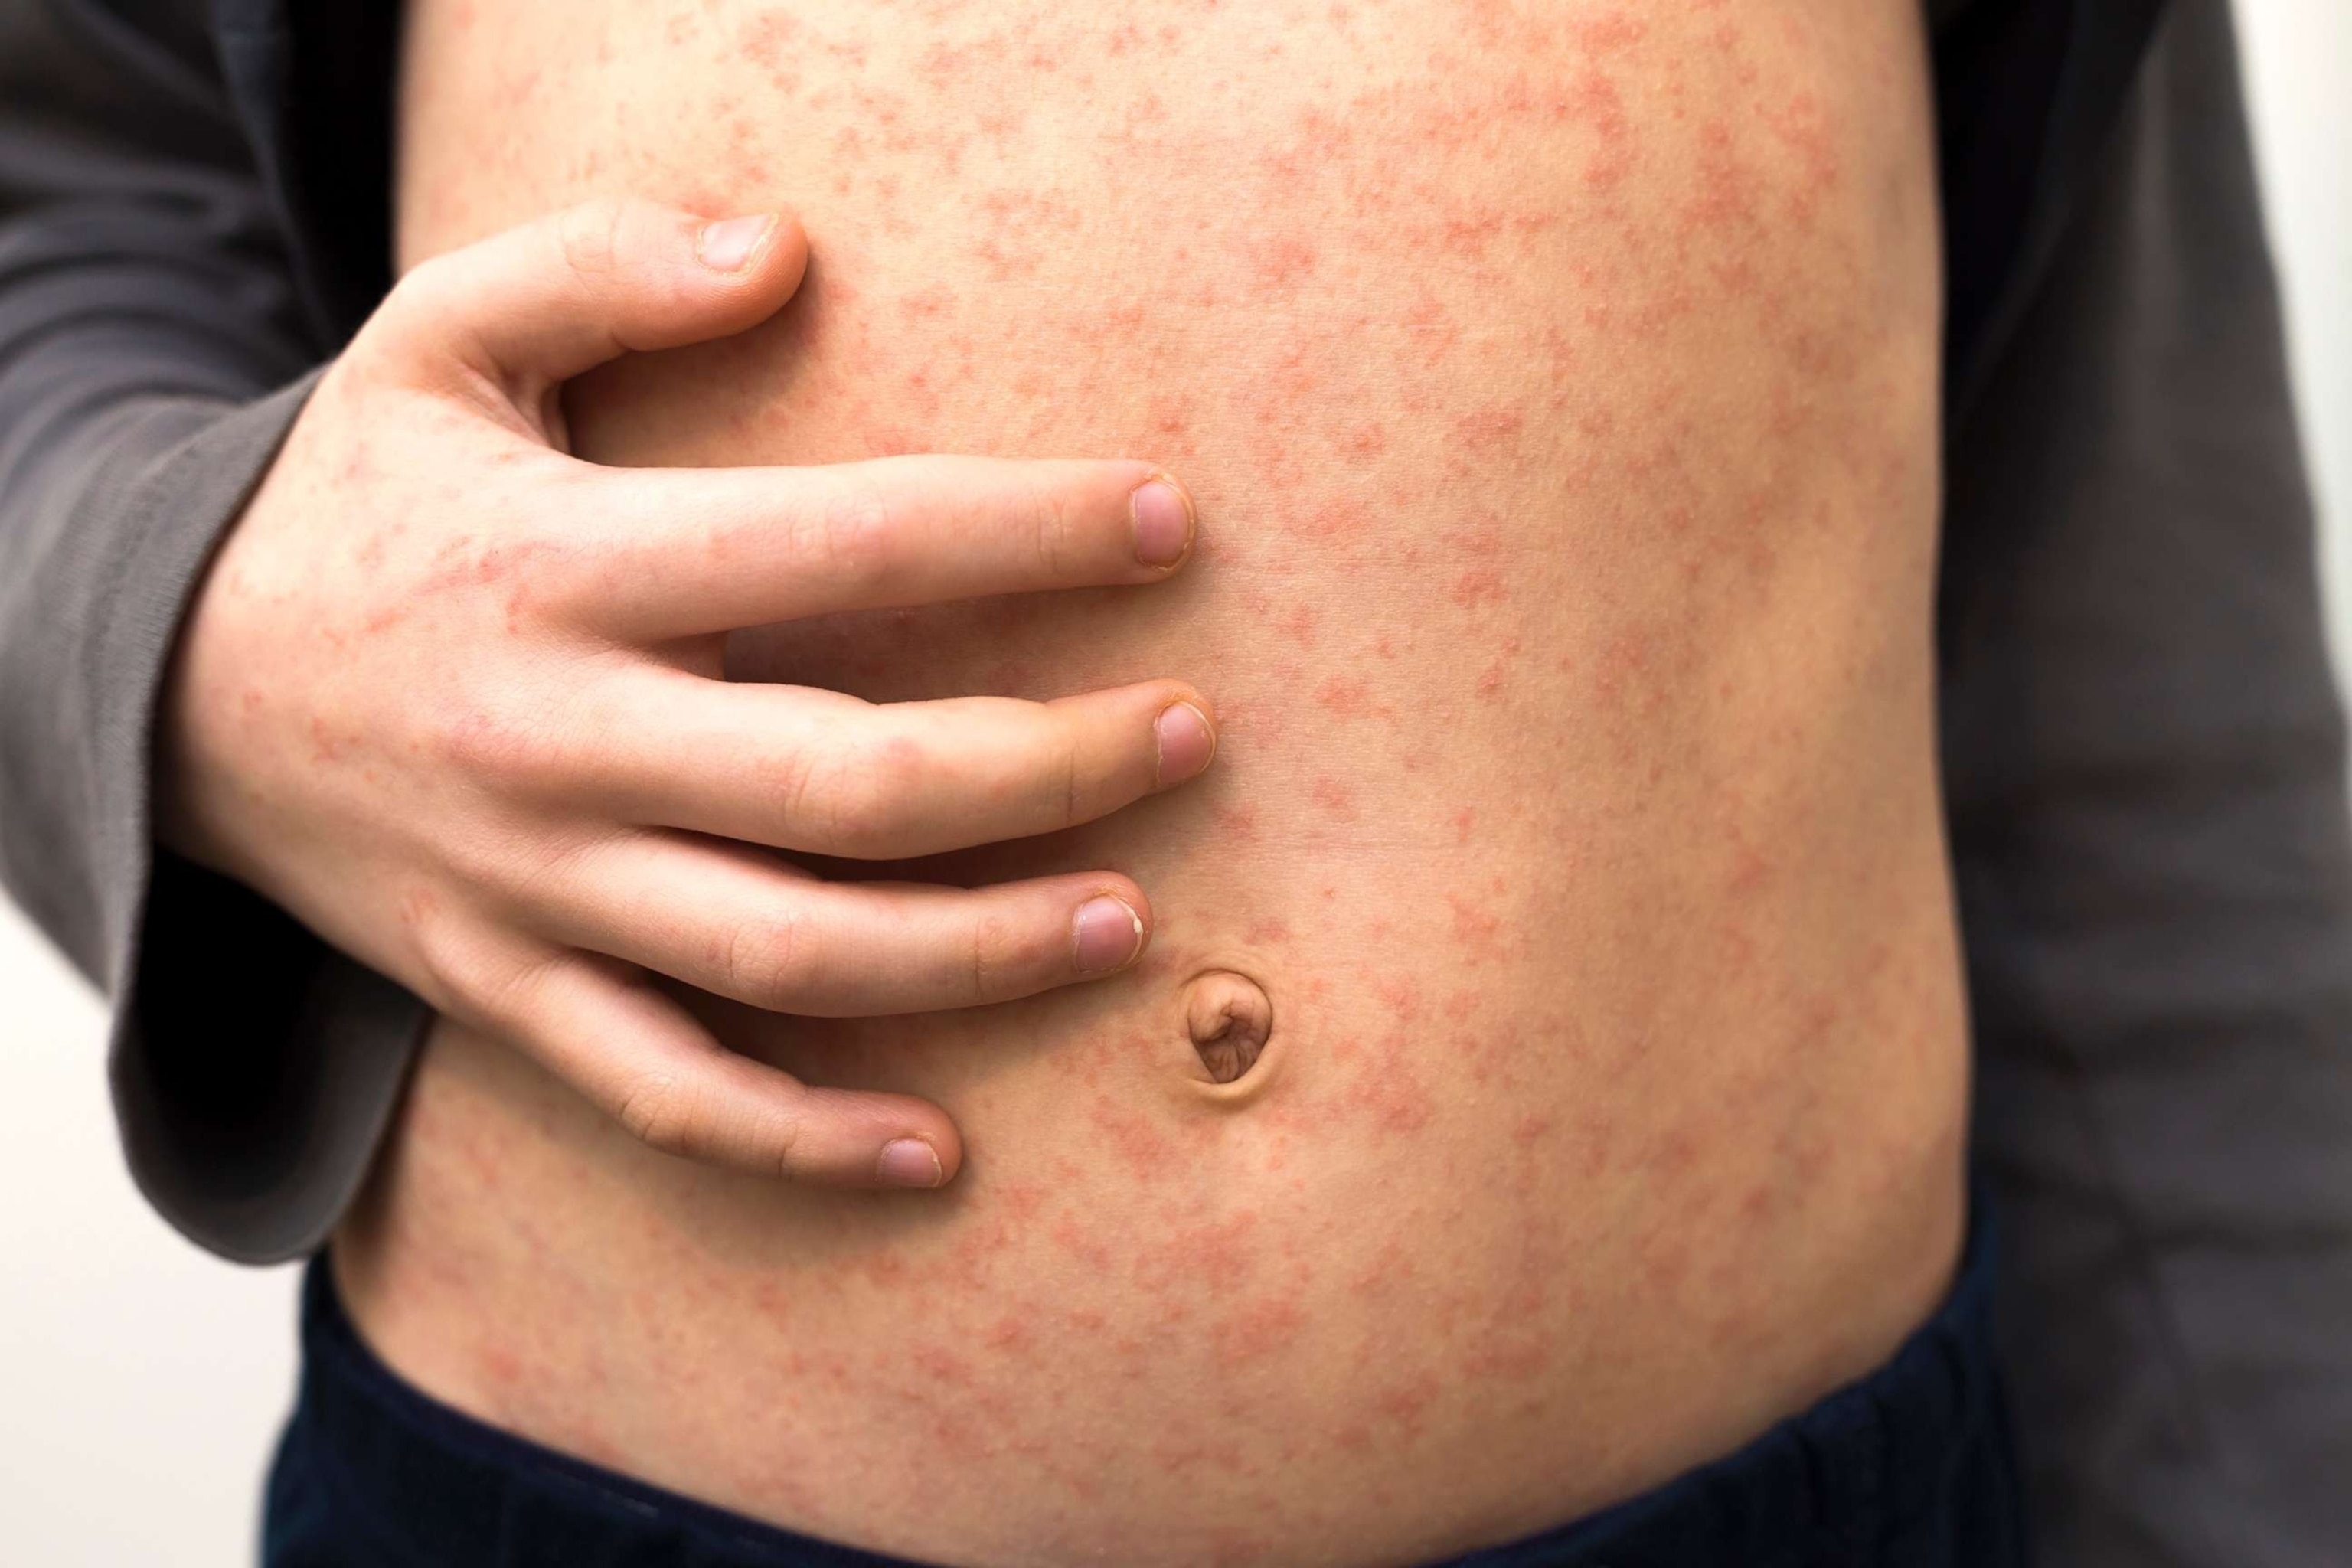 PHOTO: In this undated stock photo, a child is shown with red rash spots from measles.